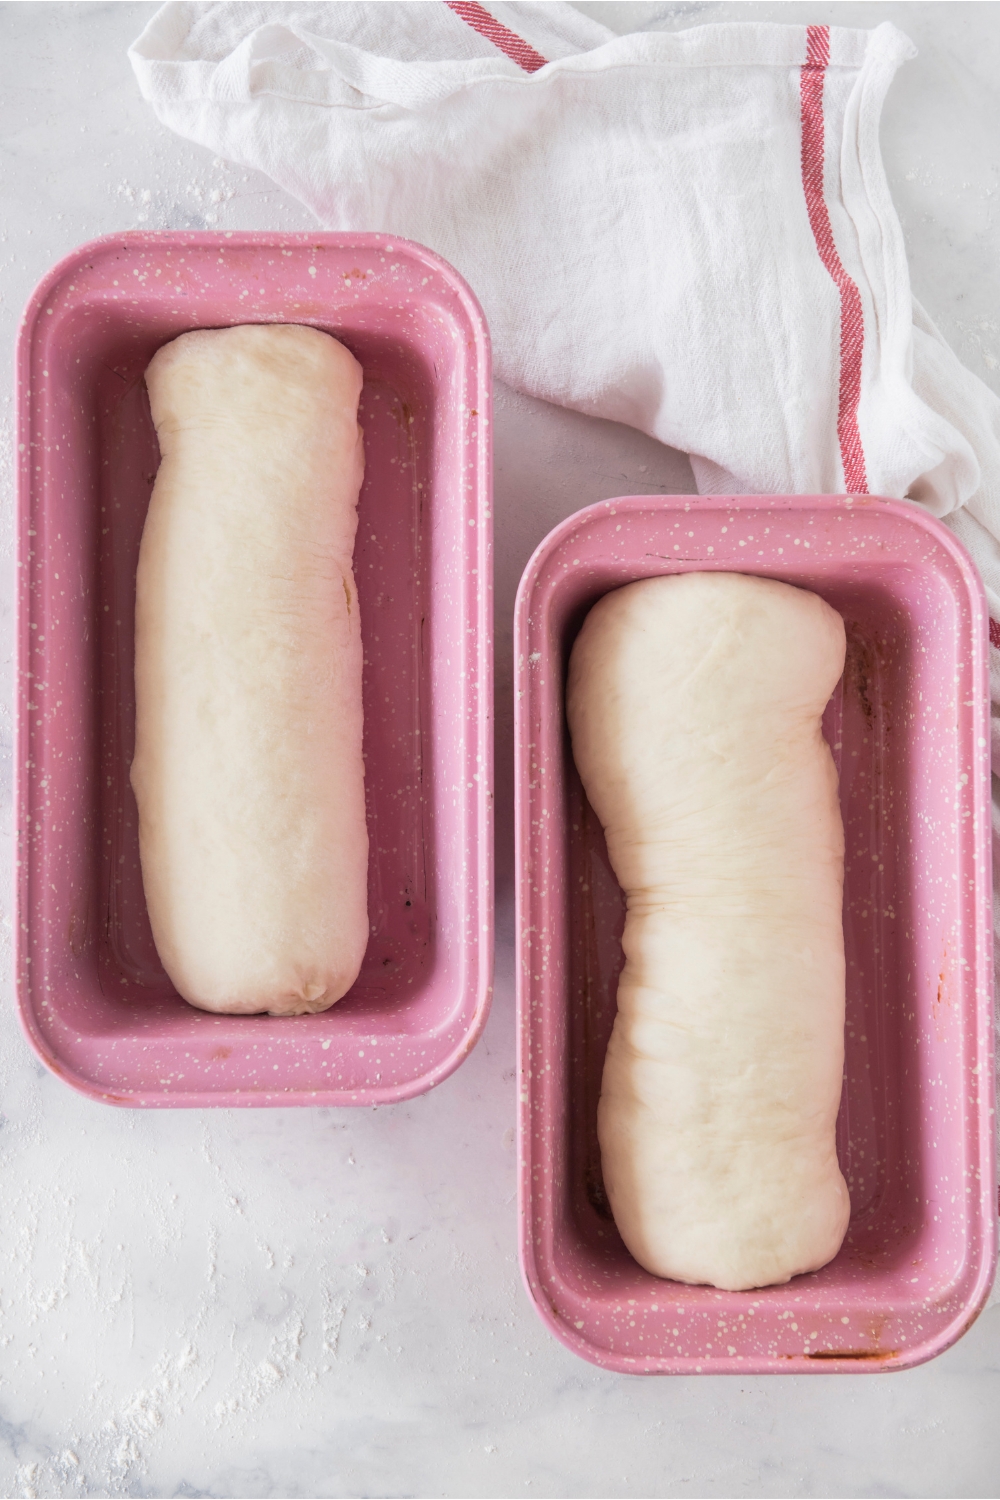 Two loaf pans with the tubular dough in it.